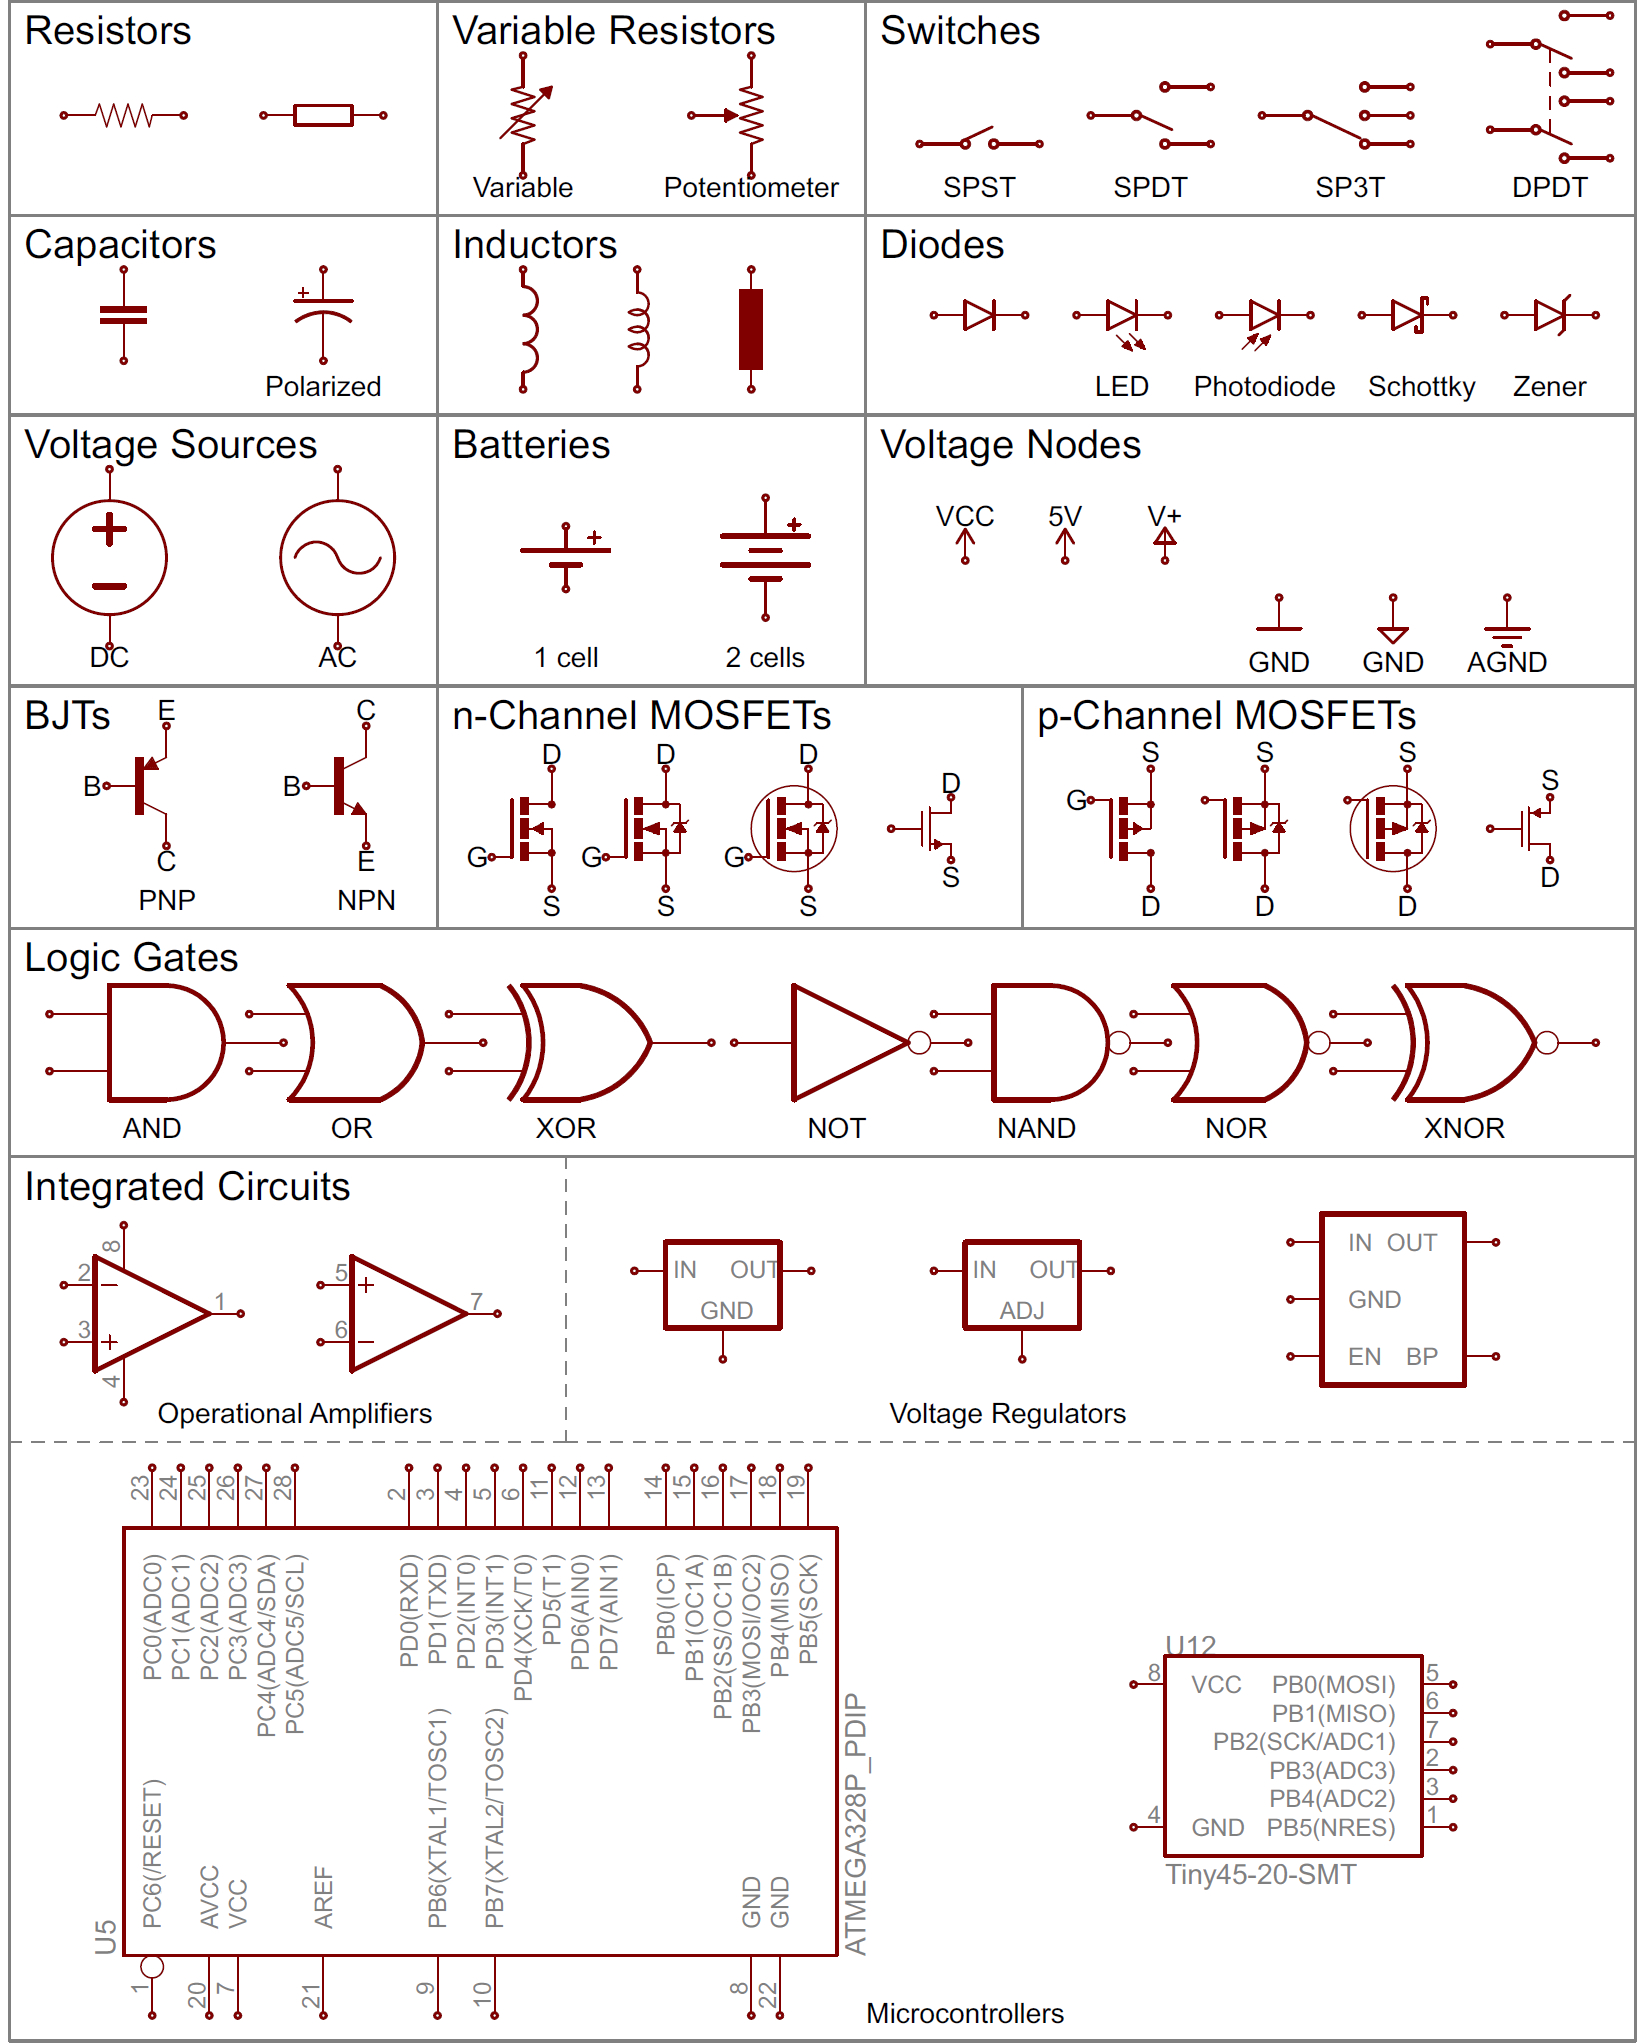 How To Read A Schematic - Learn.sparkfun - Electrical Wiring Diagram Symbols